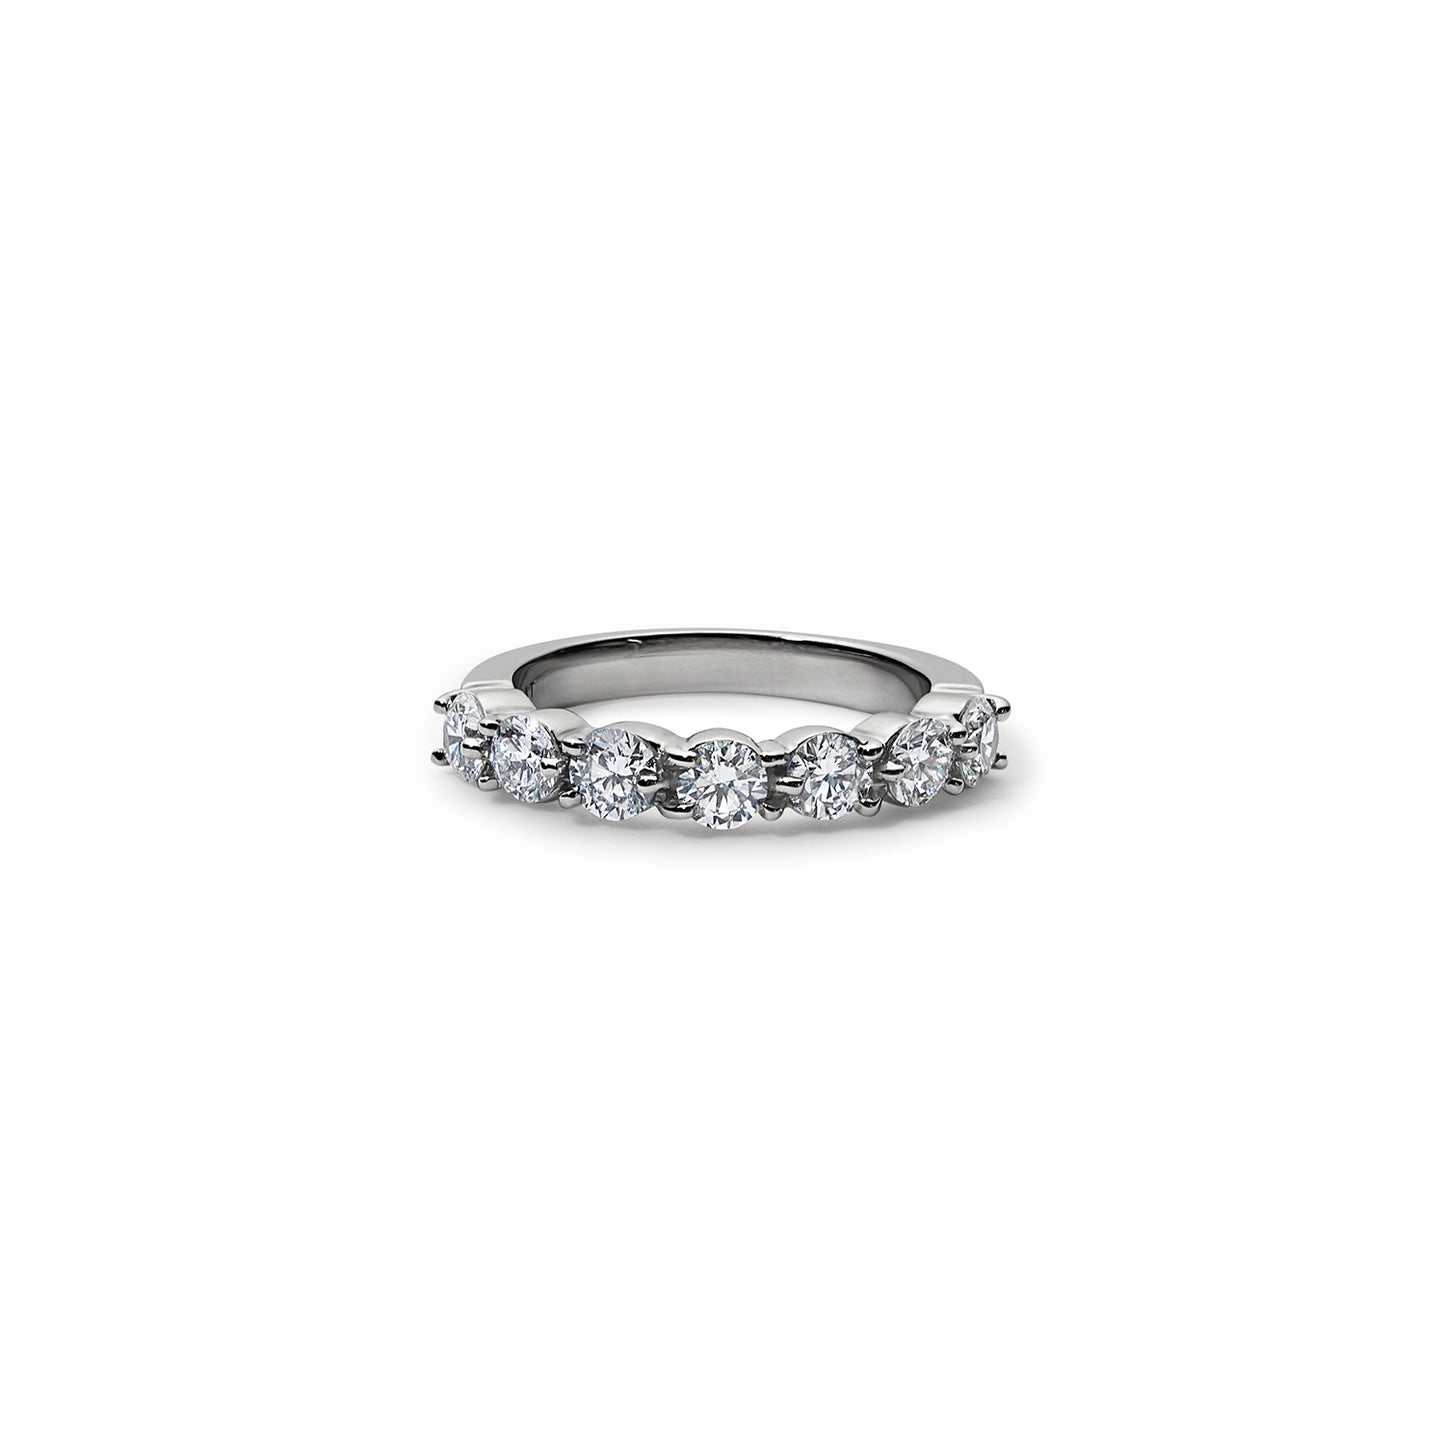 Sophisticated platinum stackable band part of the Pretty Ring Collection, designed by Jillian Abboud. Available for customization in your choice of stones and sizes, crafted in New York.